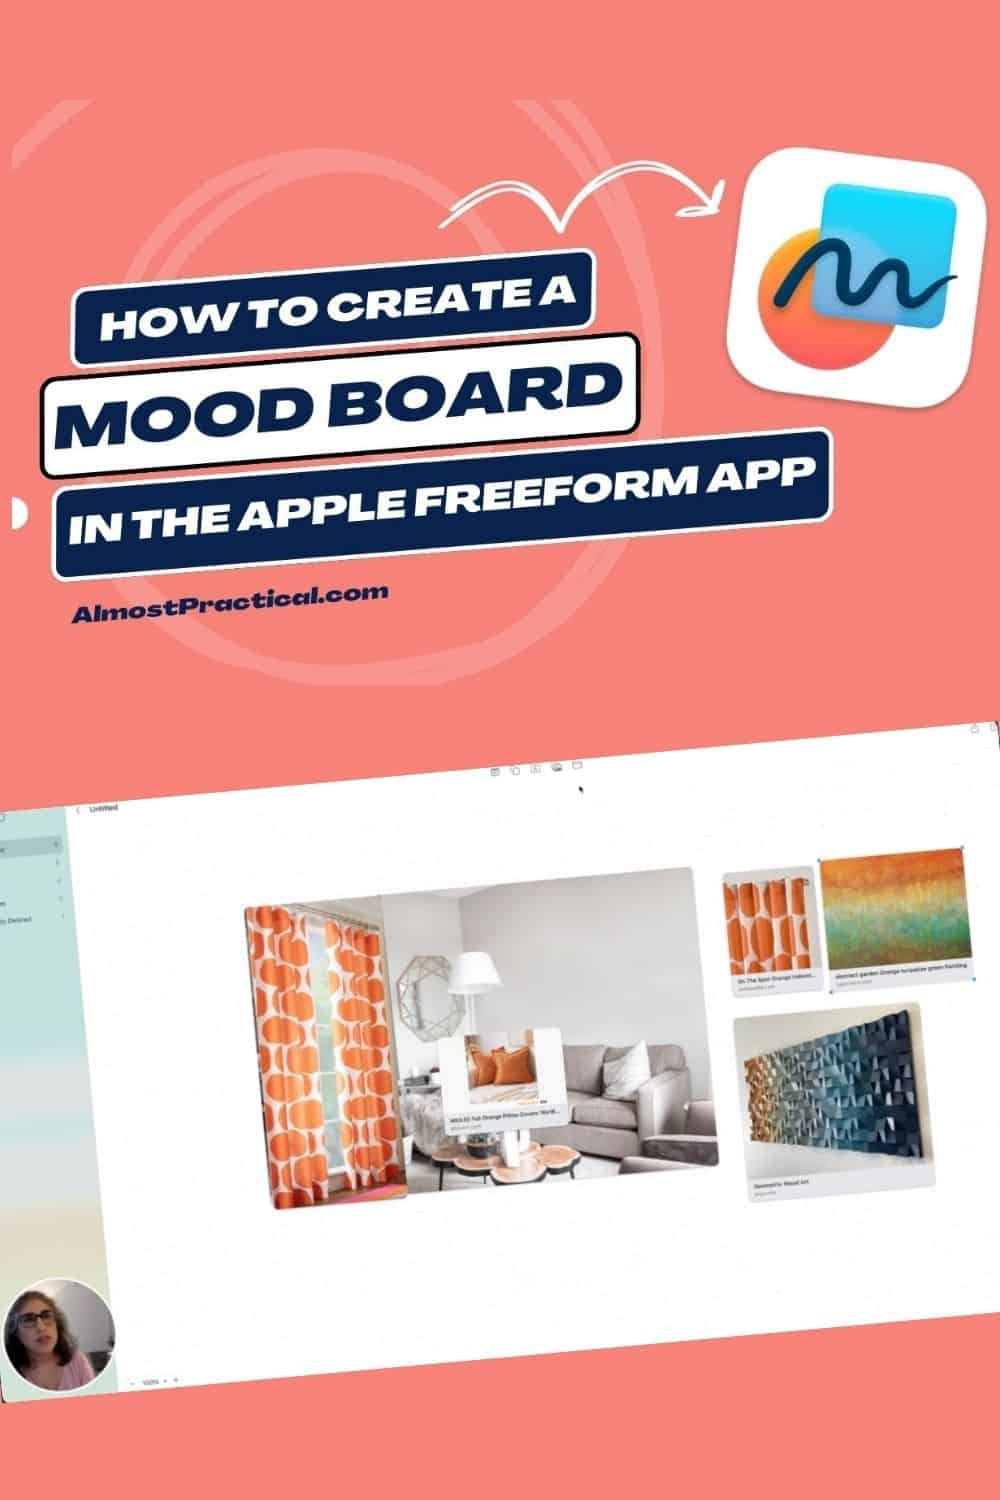 How to Use the Freeform App as a Mood Board for Your Home Decor Projects